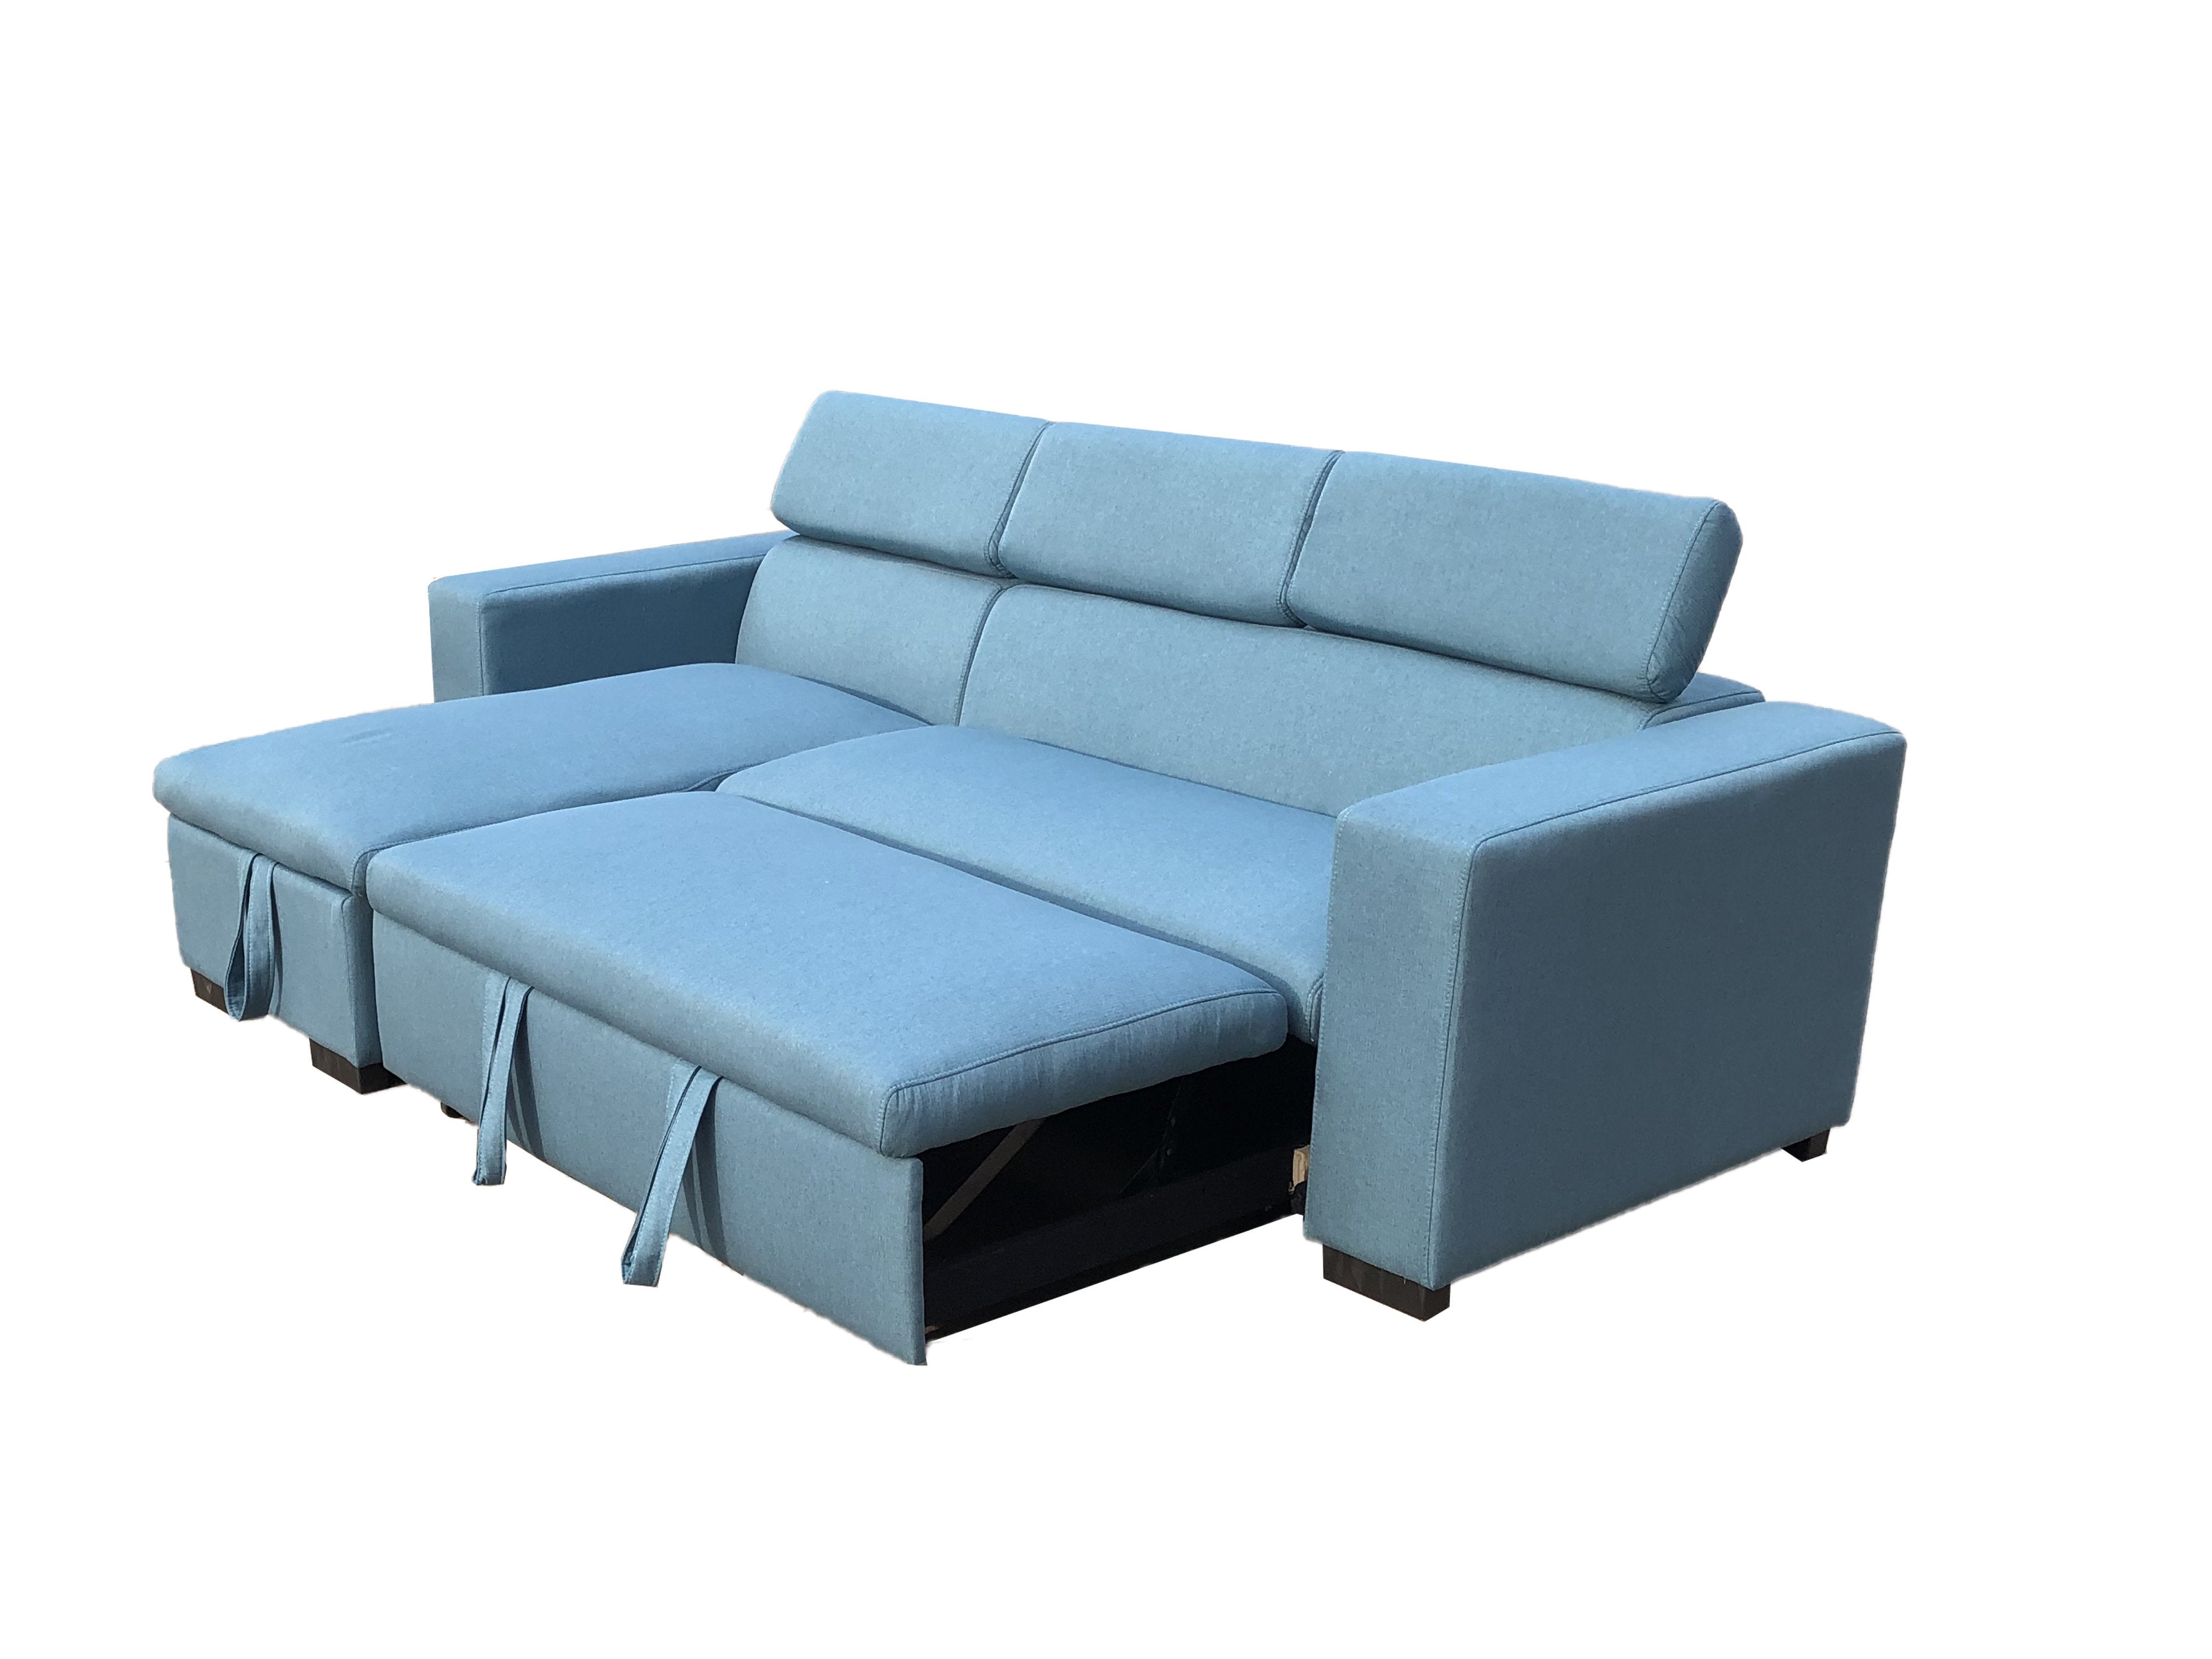 Linen Fabric 3 Seater Pullout Sofa Bed Modular With Storage Chaise Futon Corner 1959880 11 ?v=637273936638720150